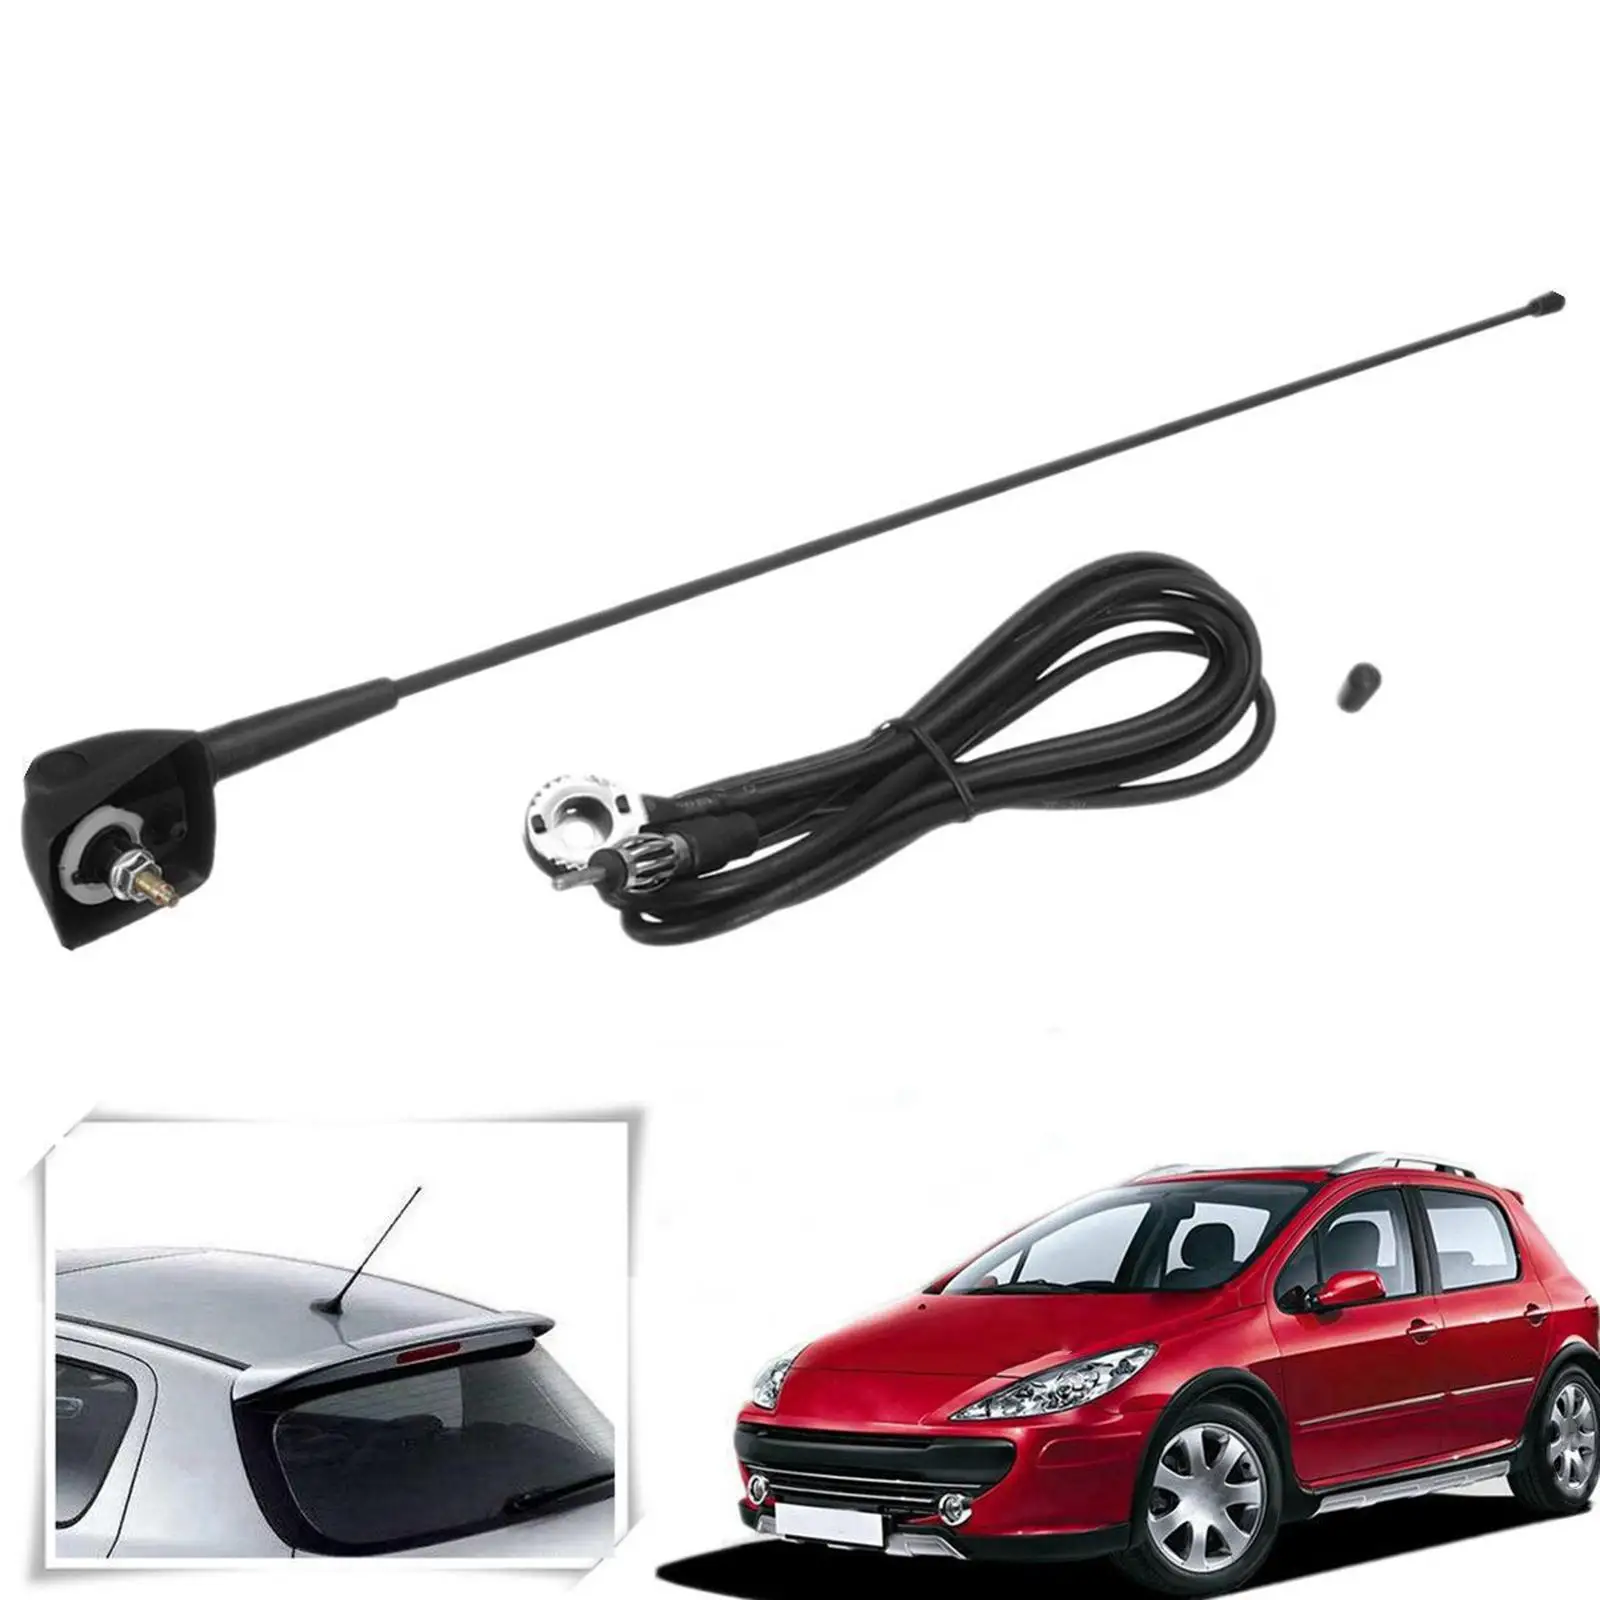 Roof Aerial Antenna FM AM Mount Kit for Peugeot 309 406 806 Durable Professional